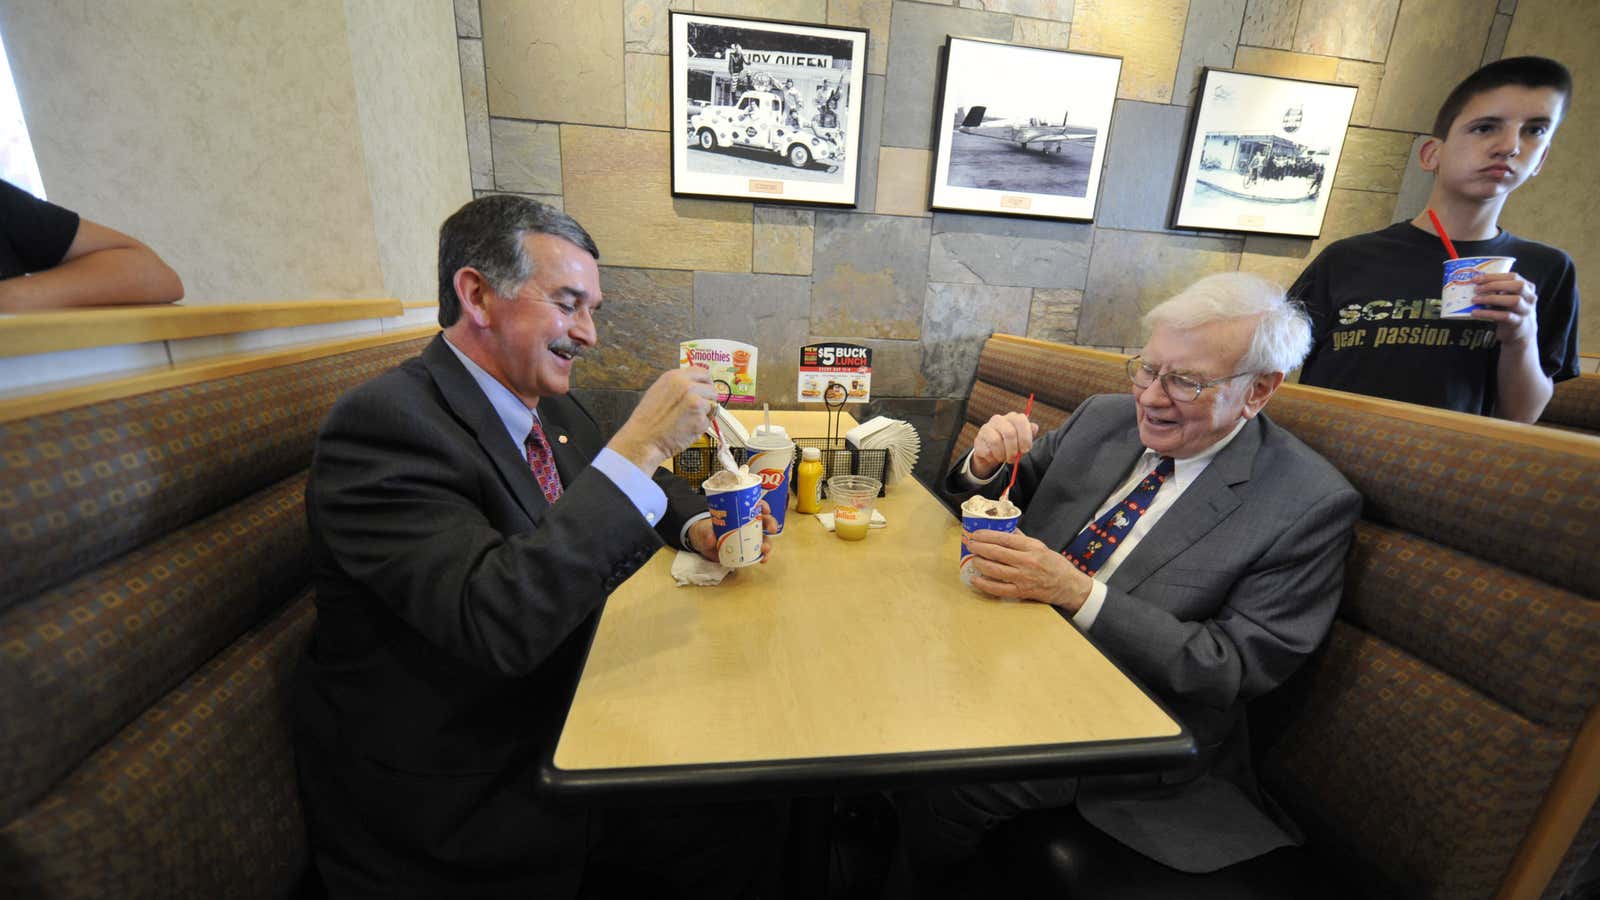 Warren Buffett enjoys an ice cream while his team of managers handle business back at Berkshire Hathaway headquarters.